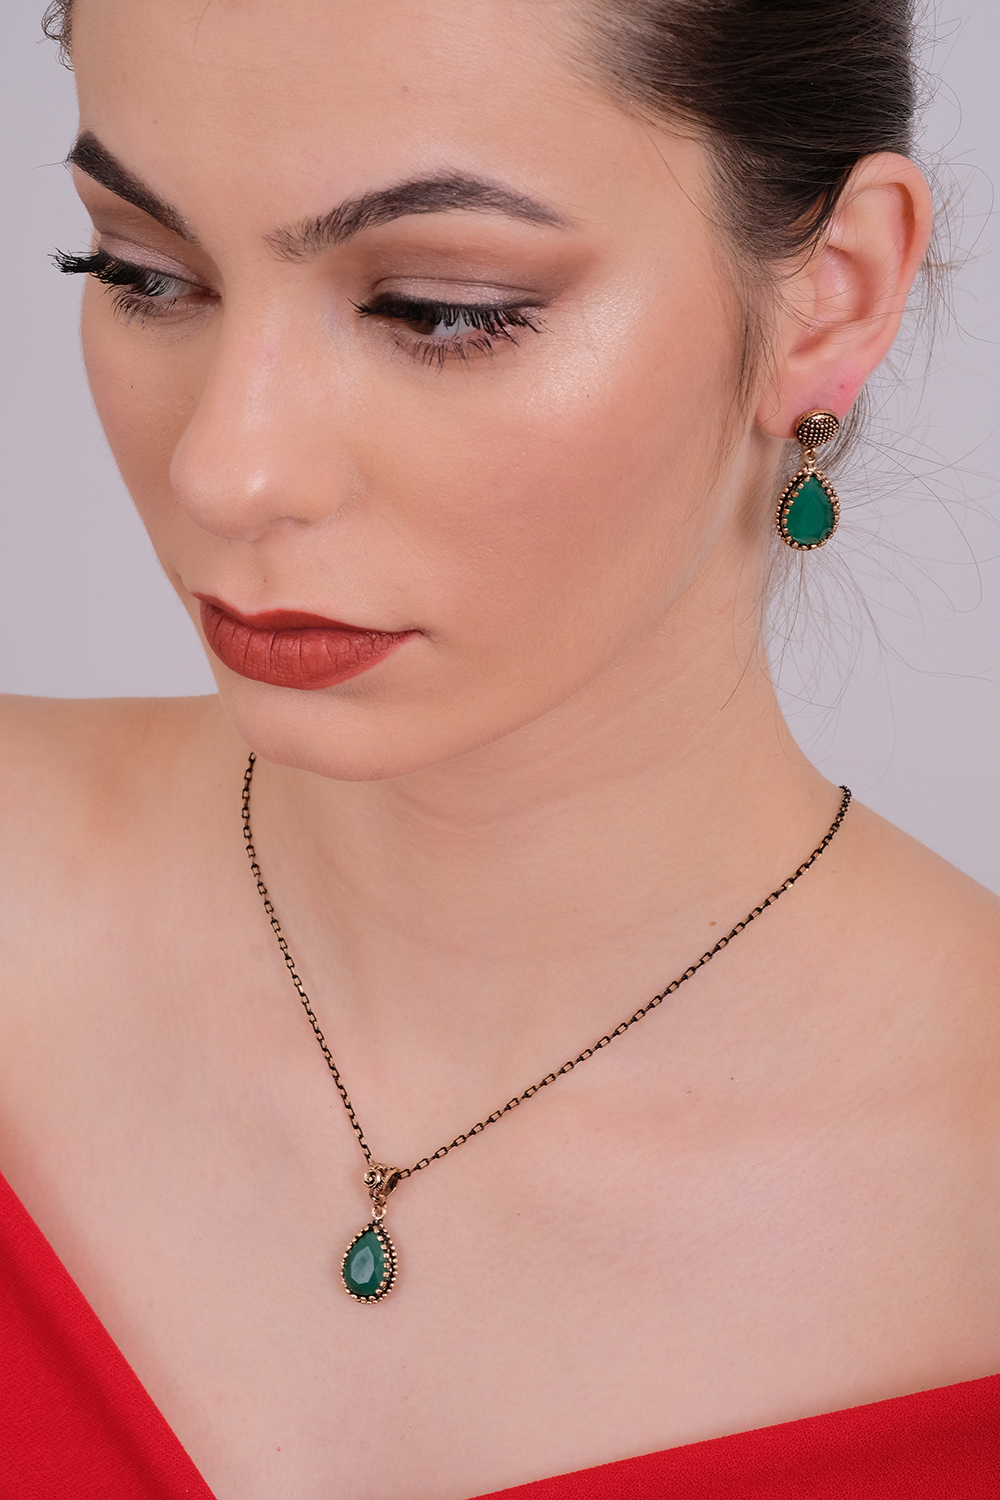 CHLORIS Necklace and Earrings Jewelry Set